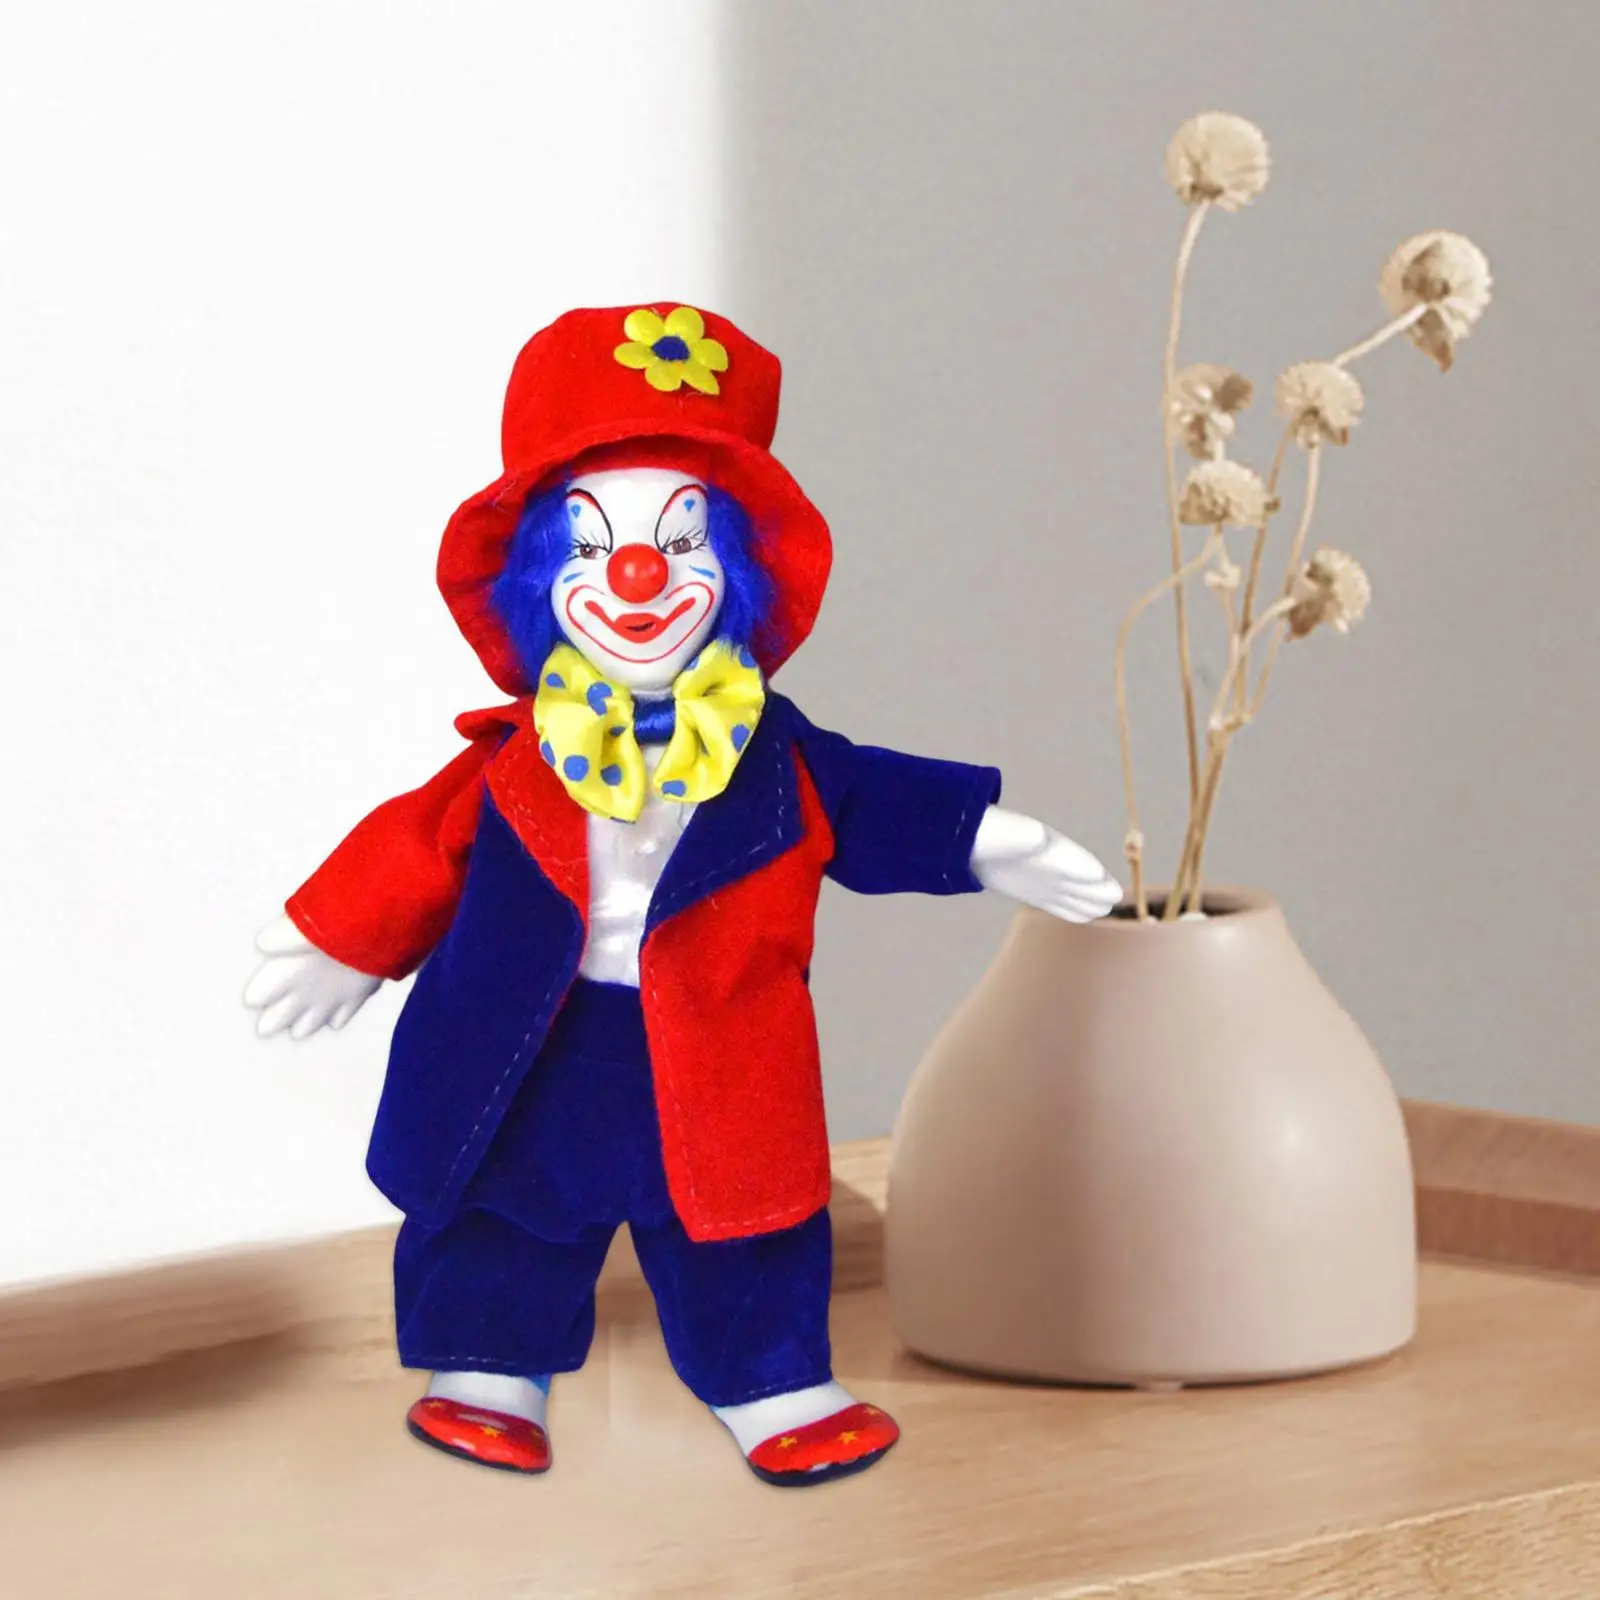 18cm Clown Doll Dolls Model Toy Collectible Arts Crafts for Birthdays Gift